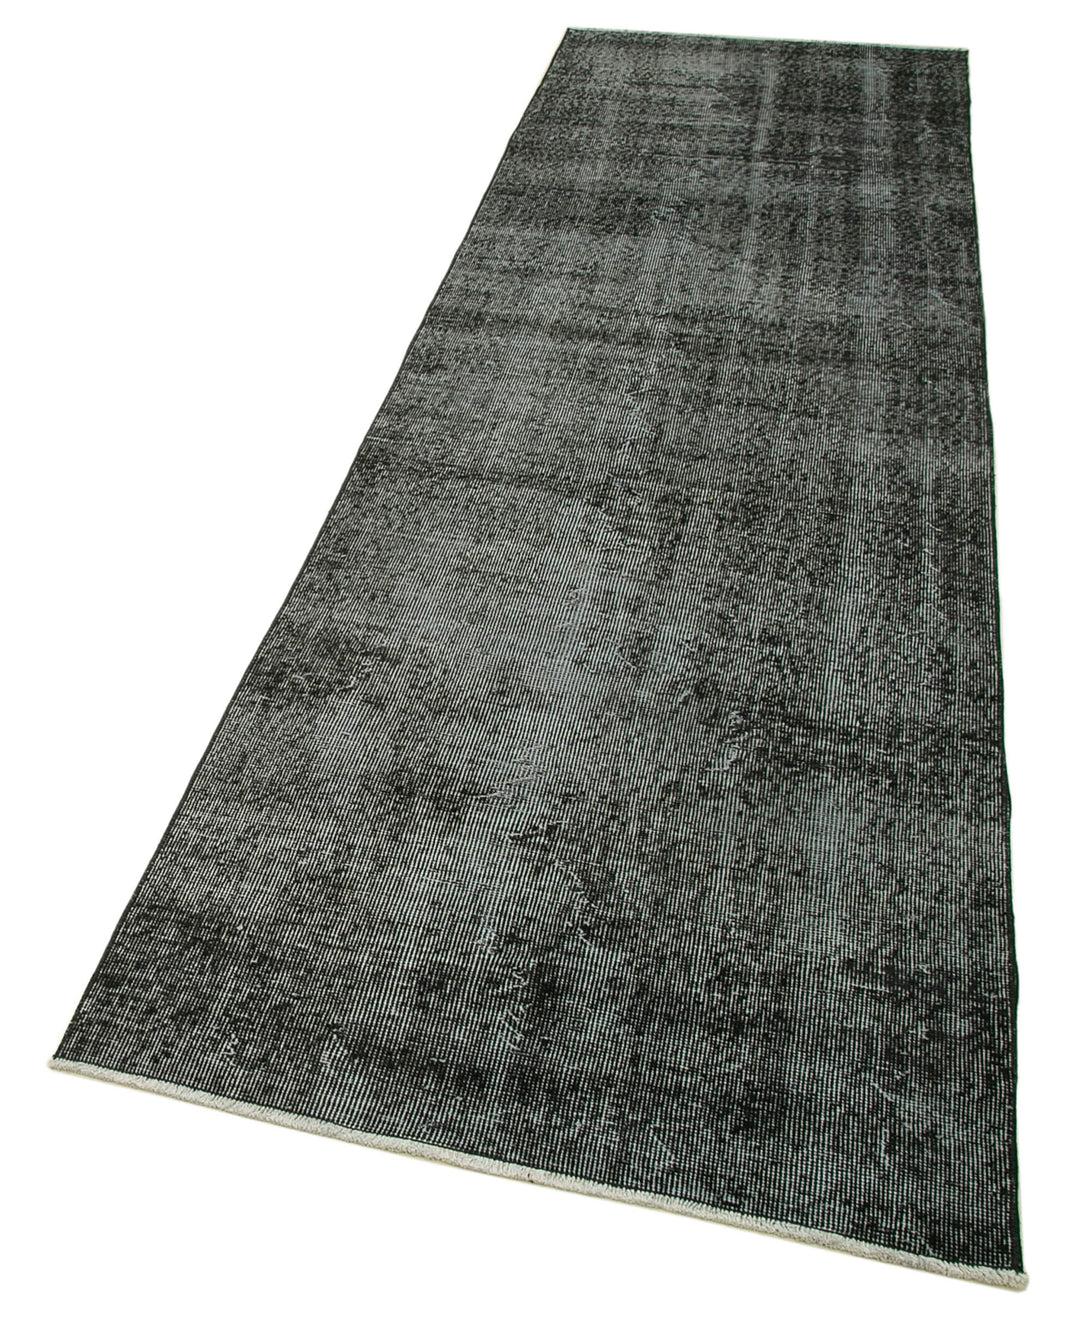 Handmade Overdyed Runner > Design# OL-AC-37116 > Size: 3'-0" x 10'-1", Carpet Culture Rugs, Handmade Rugs, NYC Rugs, New Rugs, Shop Rugs, Rug Store, Outlet Rugs, SoHo Rugs, Rugs in USA